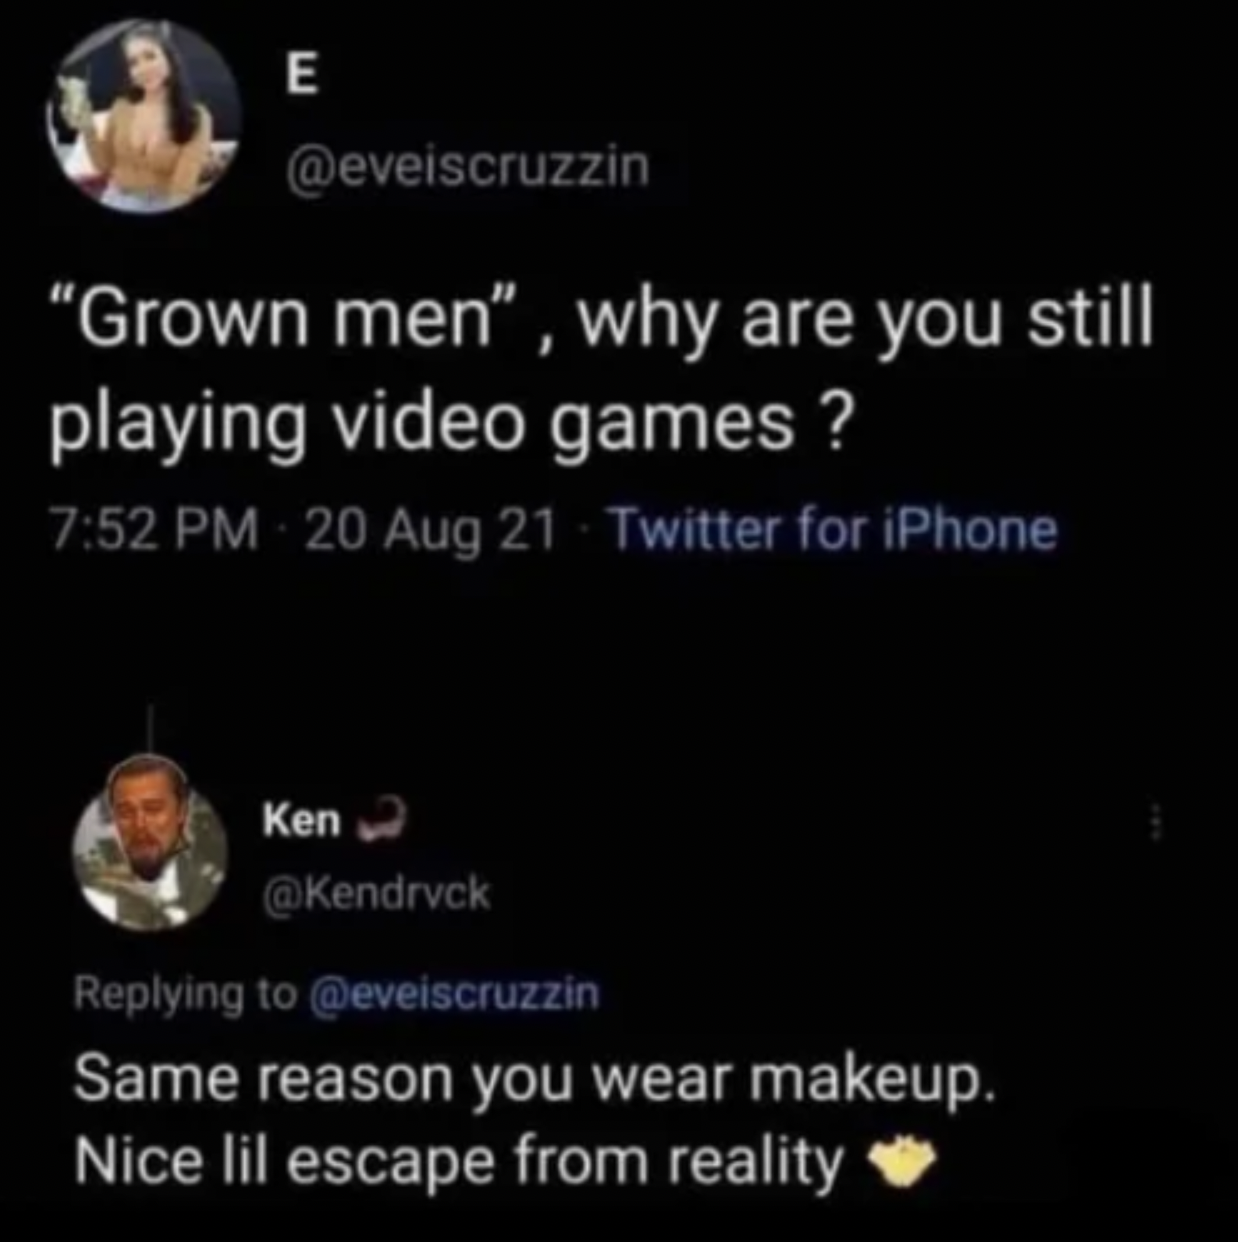 cringe pics - atmosphere - E "Grown men", why are you still playing video games? 20 Aug 21 Twitter for iPhone Ken Same reason you wear makeup. Nice lil escape from reality